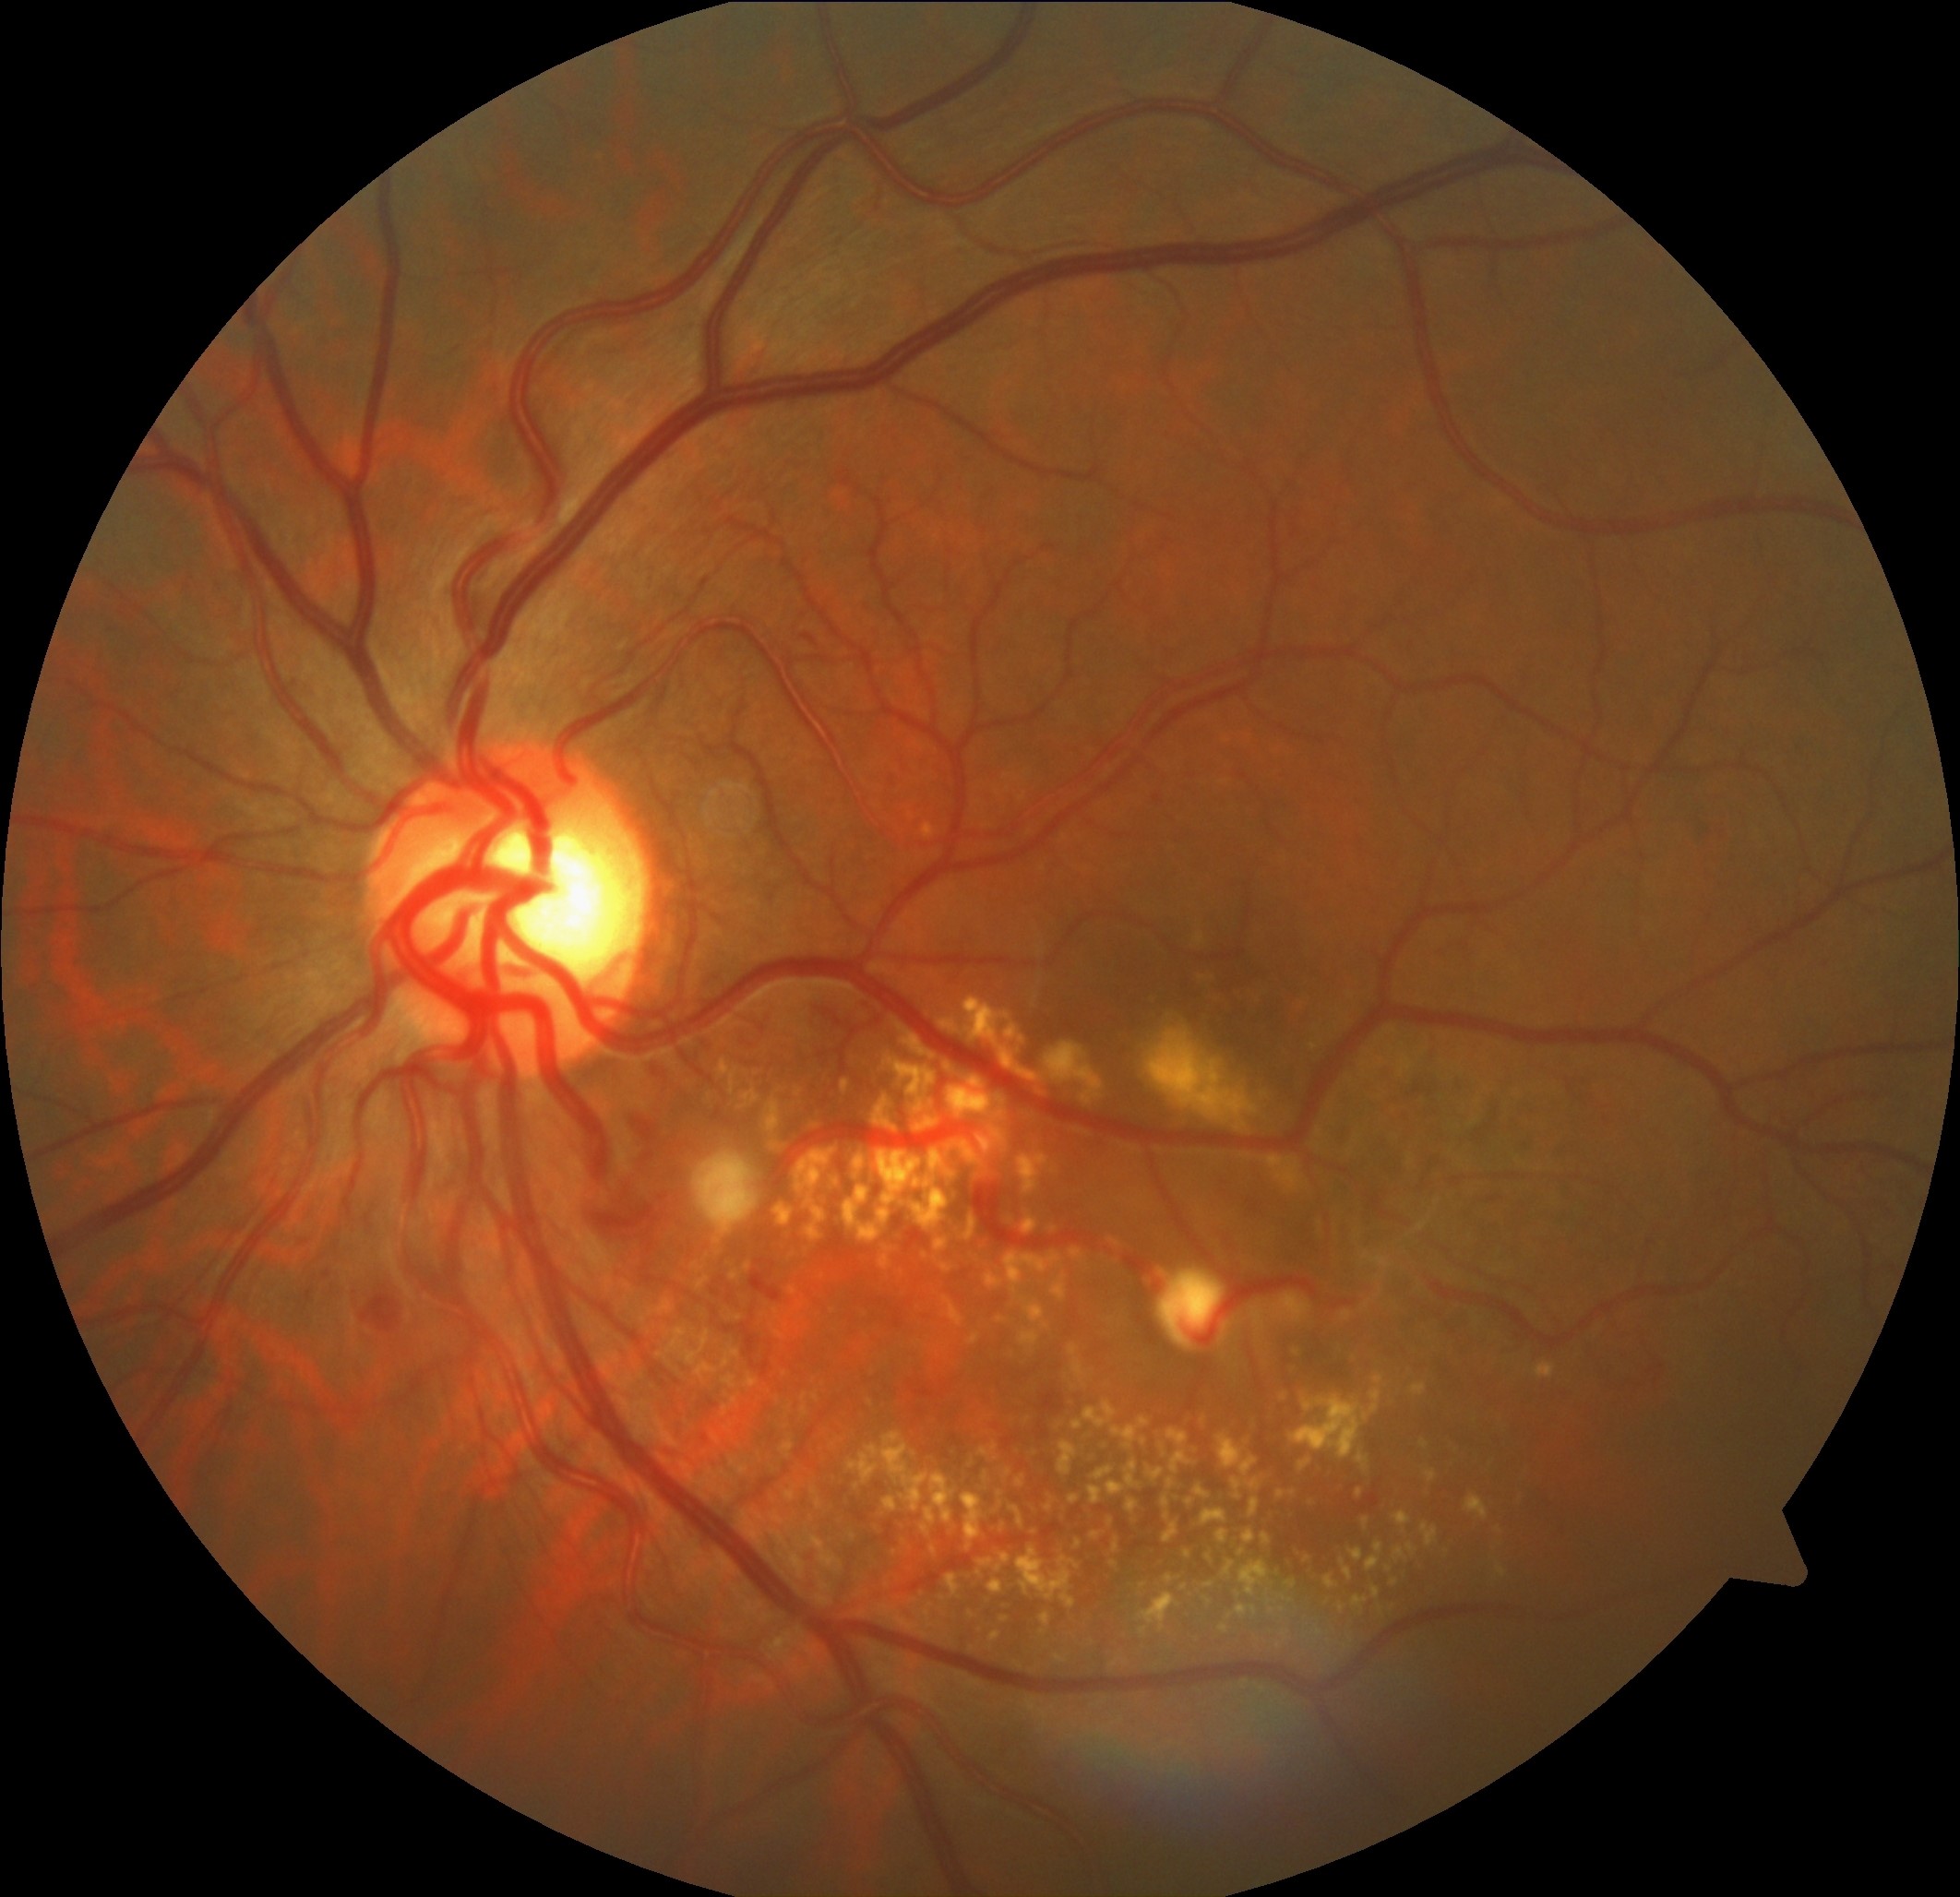 A 63-year-old male presented with acute-onset central vision loss in the left eye secondary to a ruptured retinal arterial macroaneurysm. The characteristic layers of subretinal, intraretinal and preretinal hemorrhages resorbed within three months to reveal underlying exudates, sclerotic vessels and the fibrosed aneurysm. Two additional macroaneurysms, one of which is also fibrosed, are visible in the proximal portion of the inferotemporal arcade.